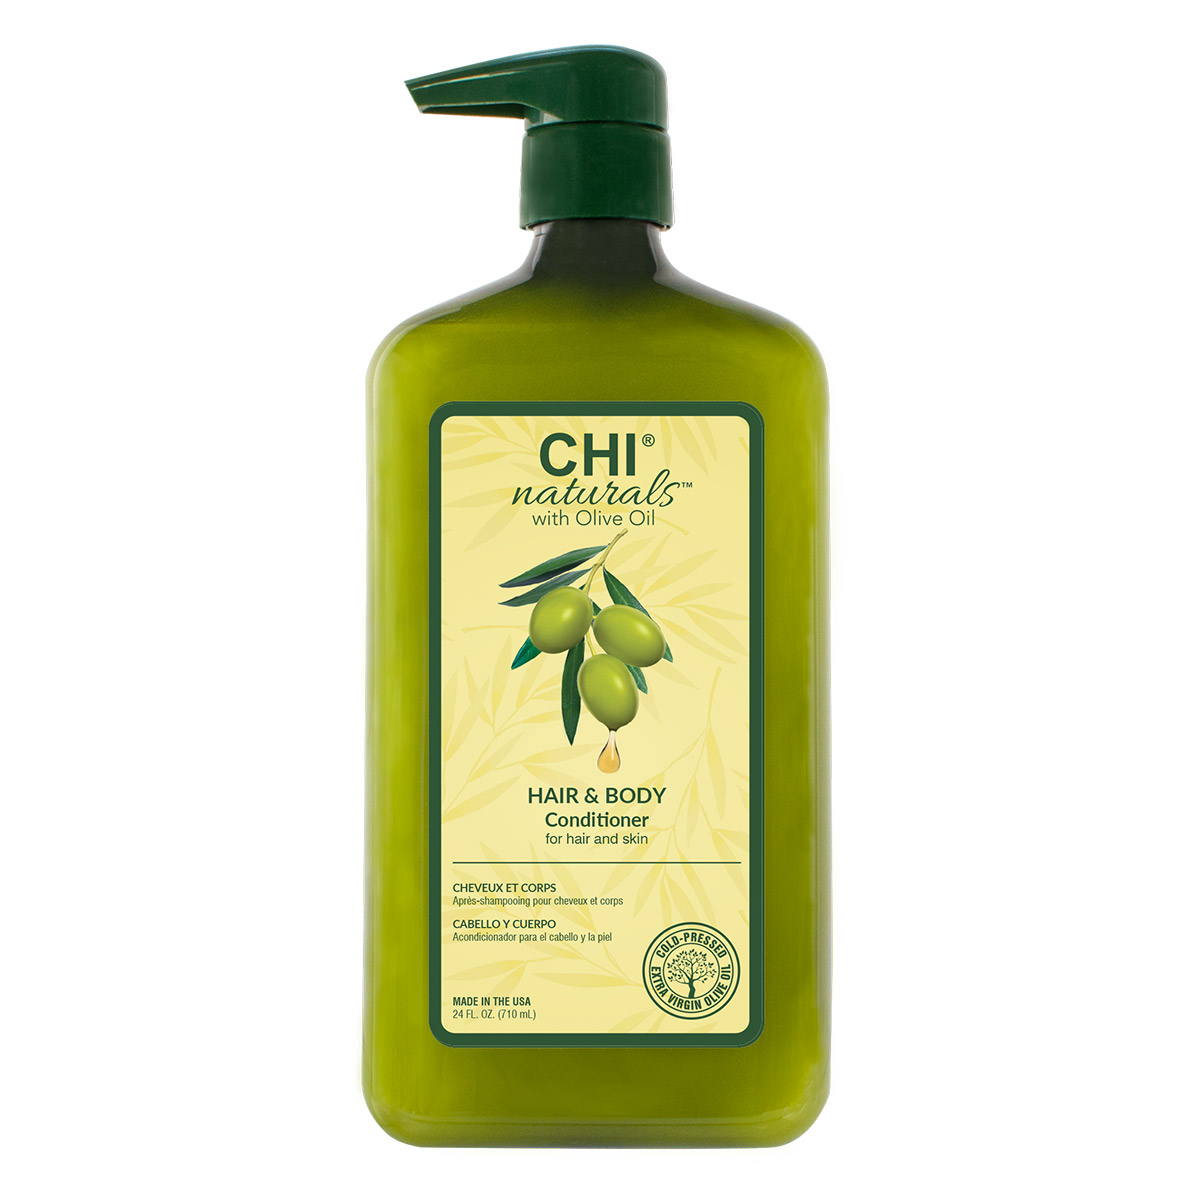 Ajania - CHI-Natural with Olive Oil Hair and Body conditionerNaturals-with-Olive-Oil-Hair-and-Body-Conditioner-24-oz